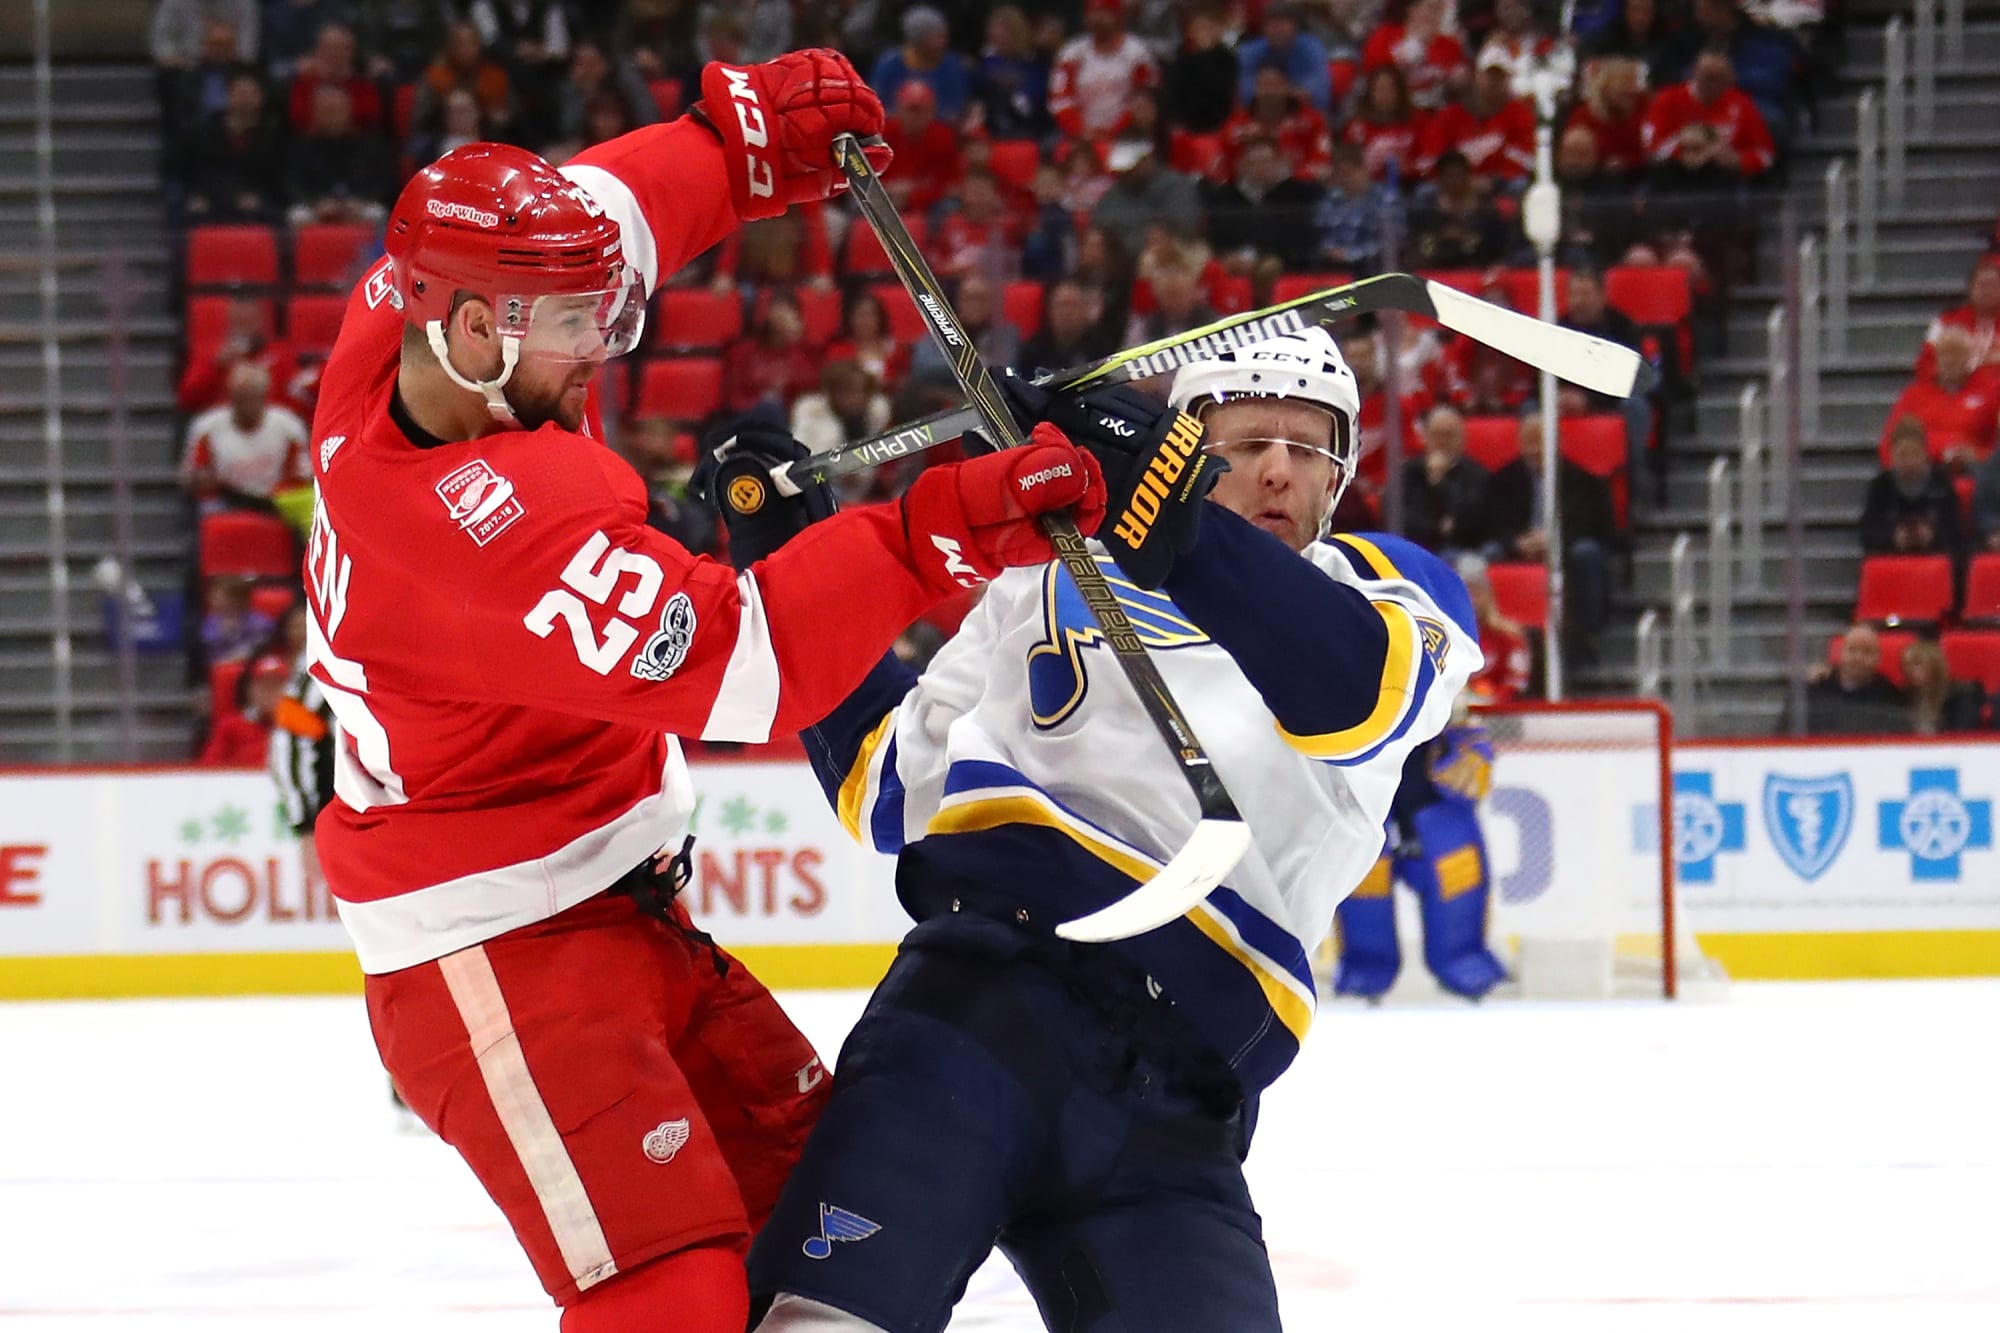 Detroit Red Wings 4, St. Louis Blues 2: Best photos from LCA